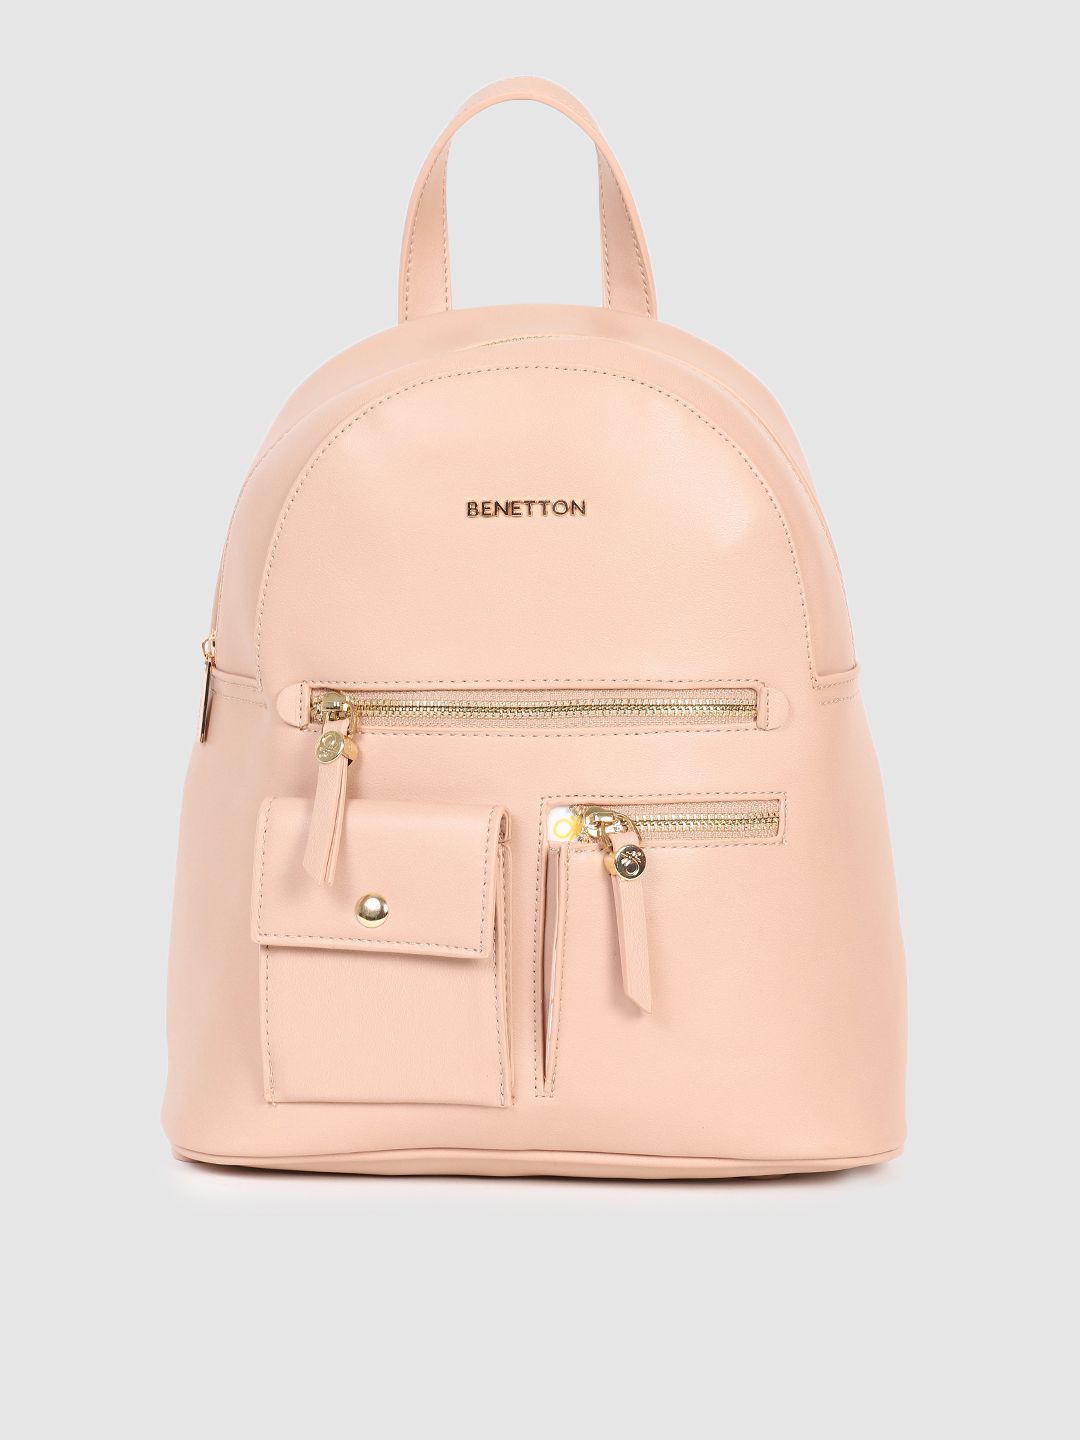 United Colors of Benetton Beige Backpack Price in India